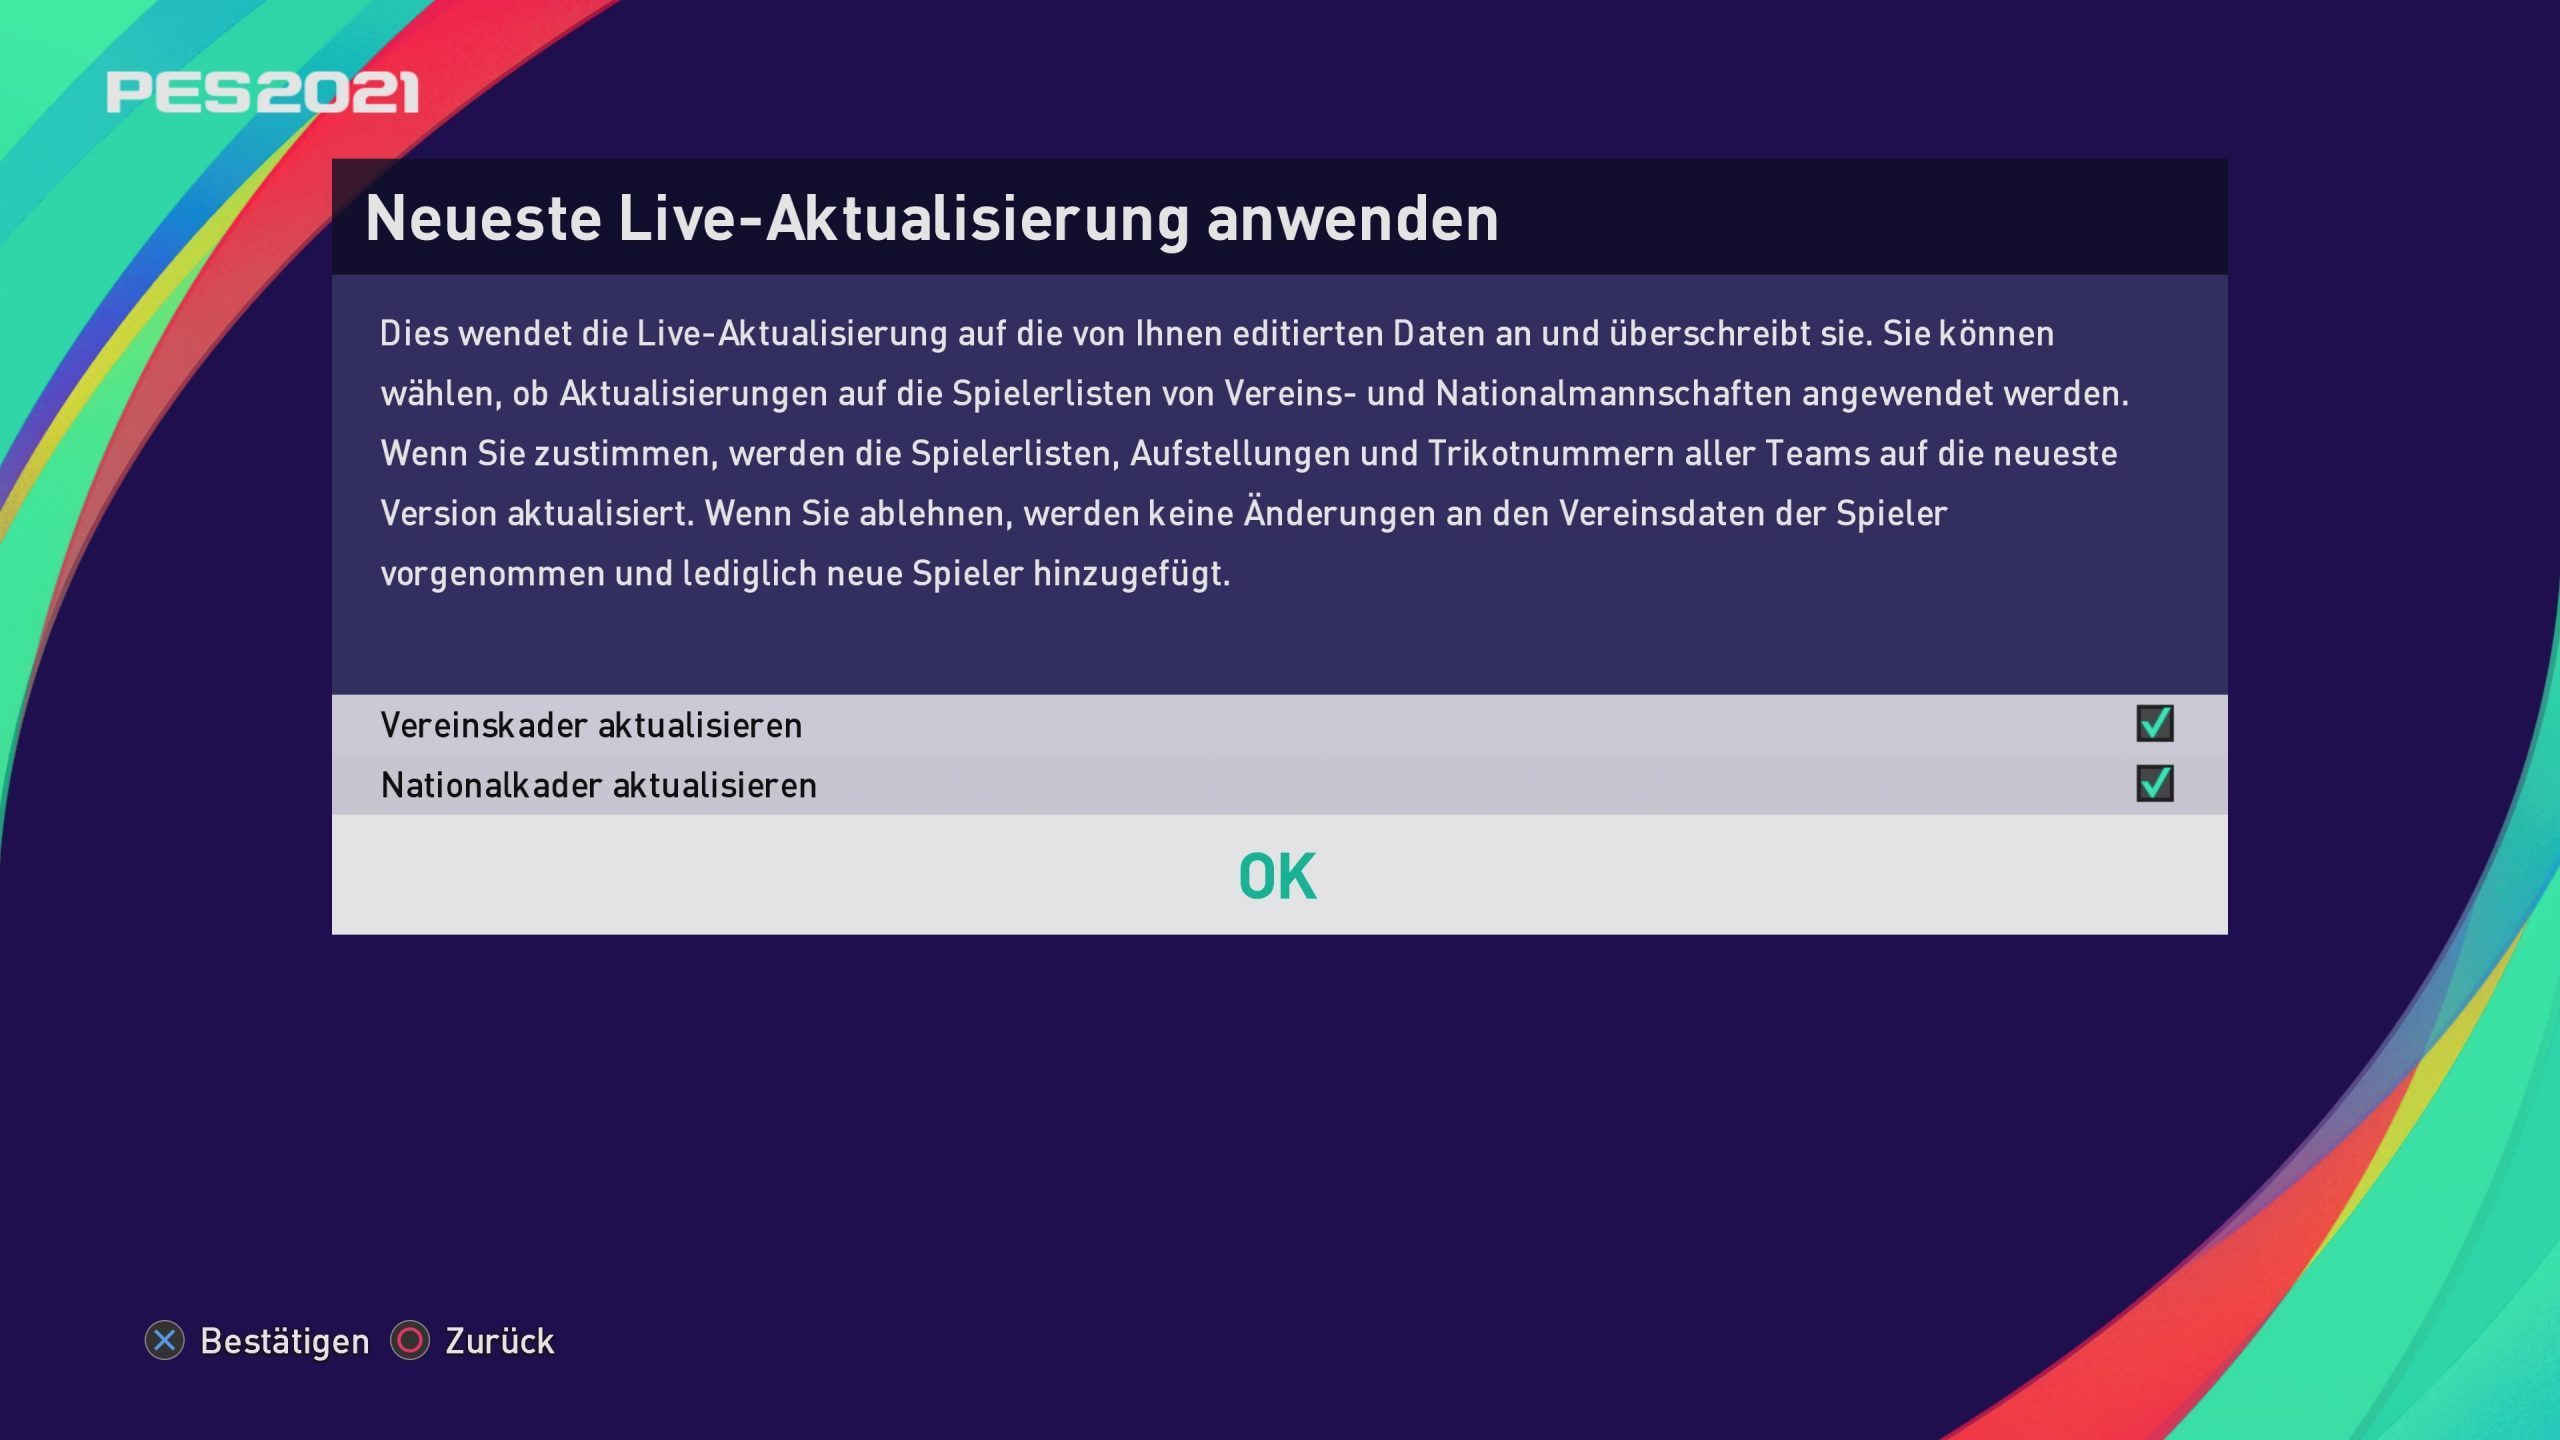 PES 2021 Patch Live Aktualisierung anwenden